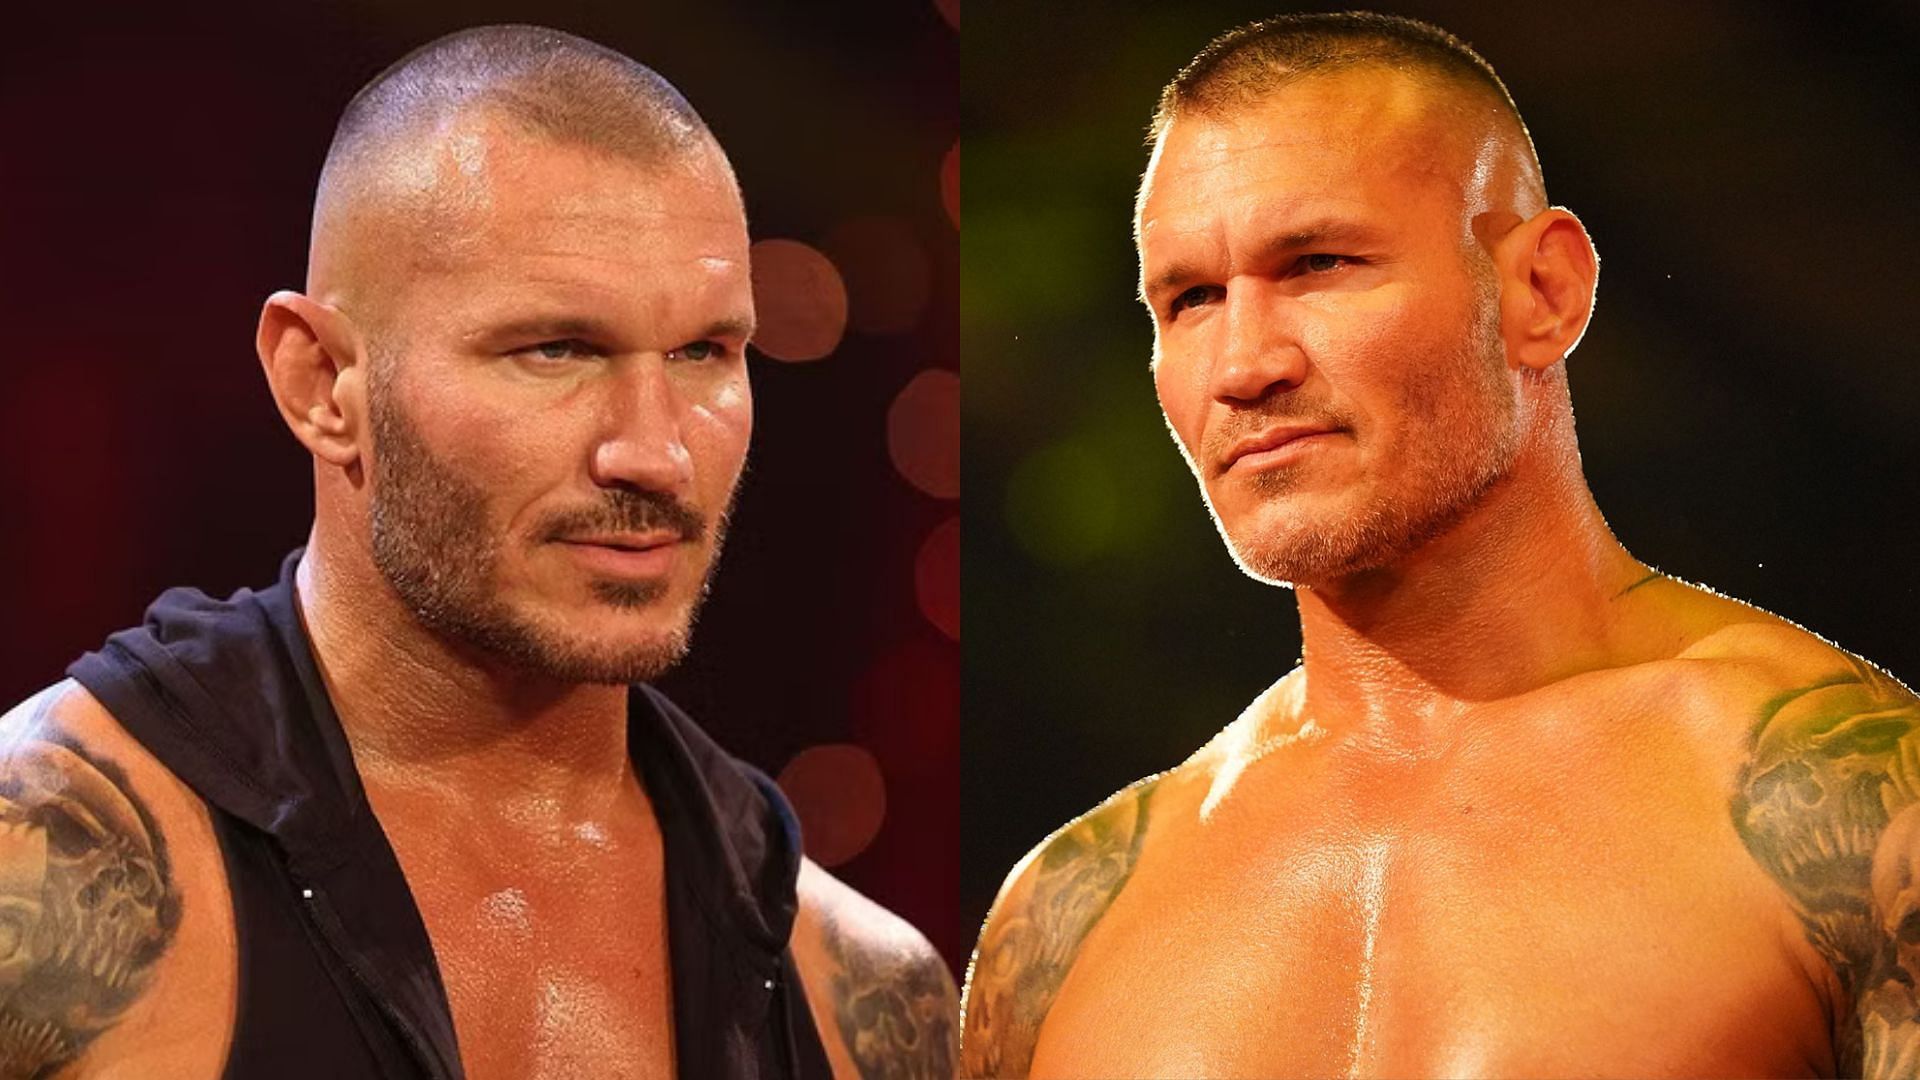 Orton has been out of action for over a year.